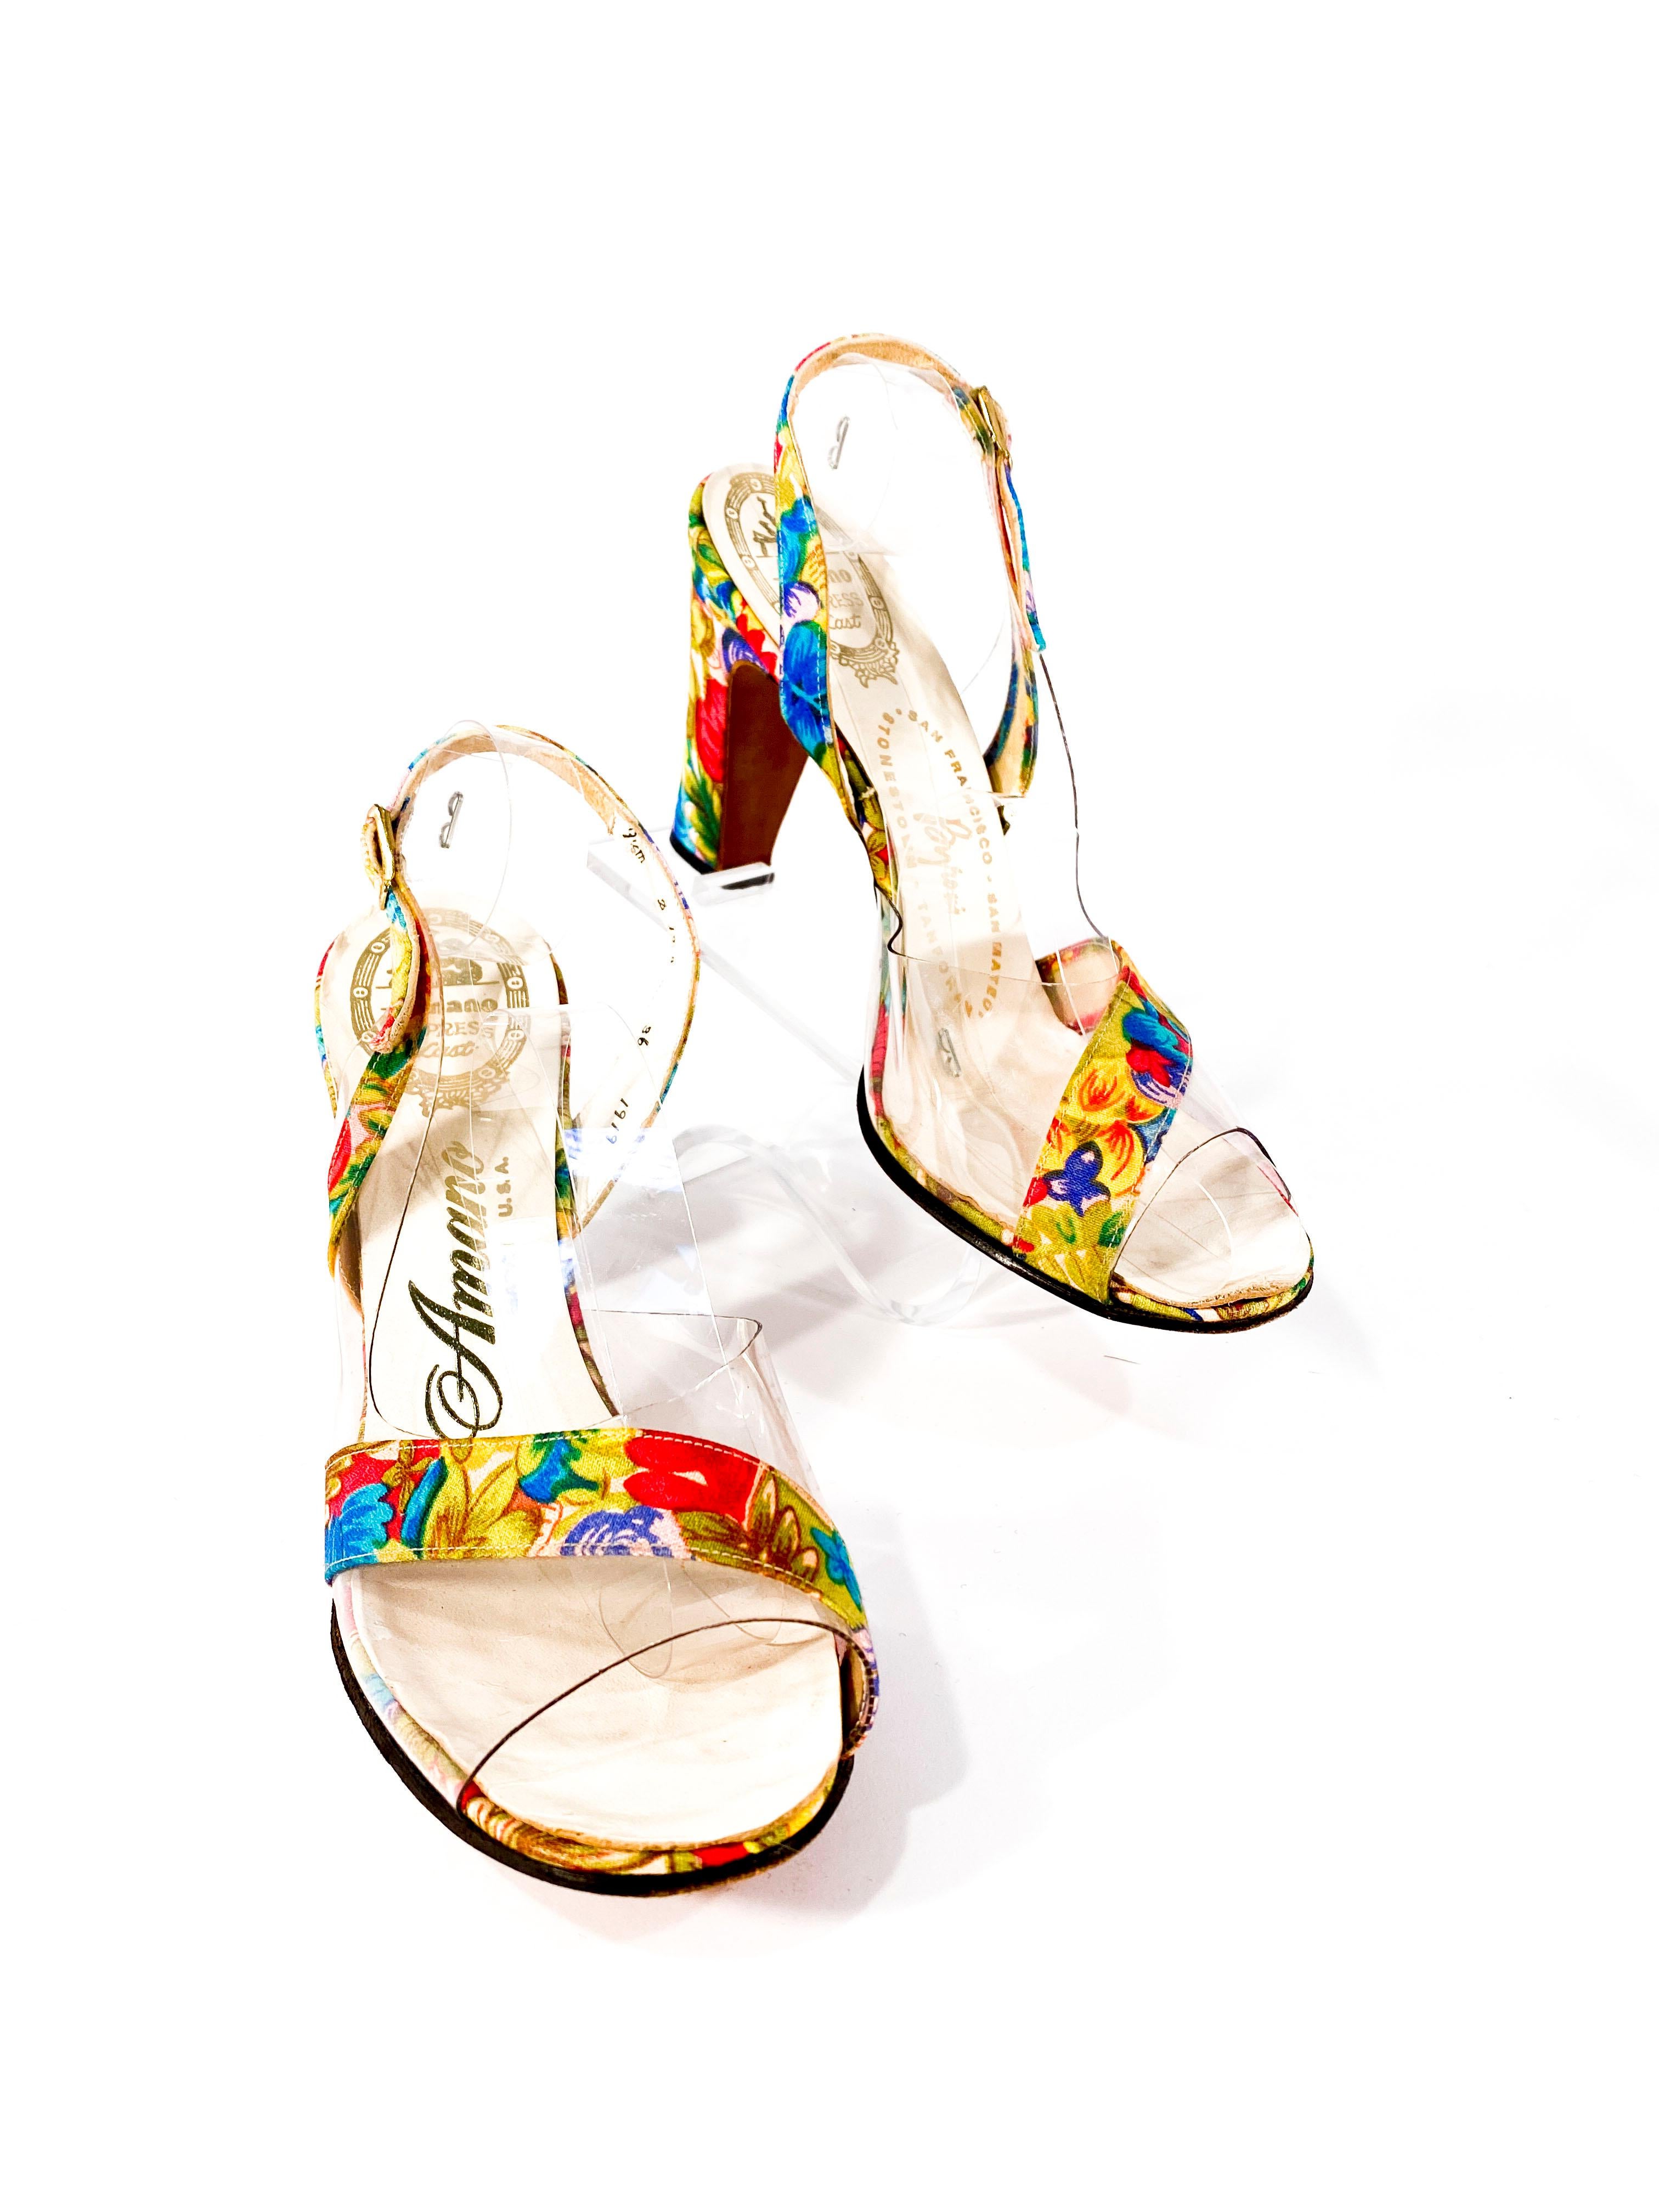 Late 1960s to early 1970s vibrantly printed floral heels with matching handbag. The peptone heels have clear vinyl accents and the envelope purse has a double gold brass chain that can be worn short or long. The handbag is lined in twill with brass